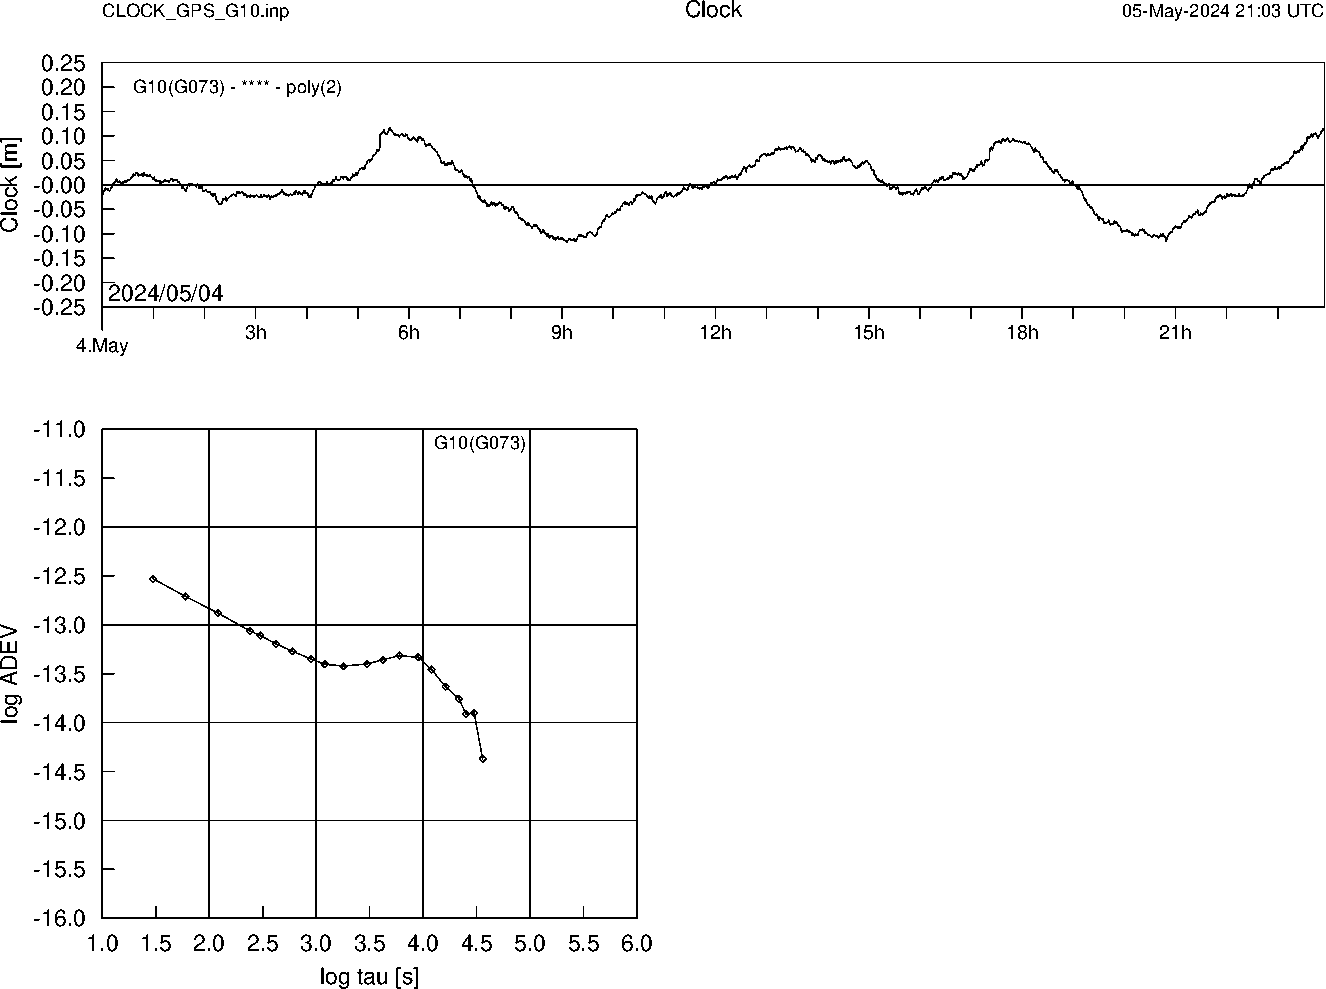 GPS G10 Clock Time Series and Allan Deviation